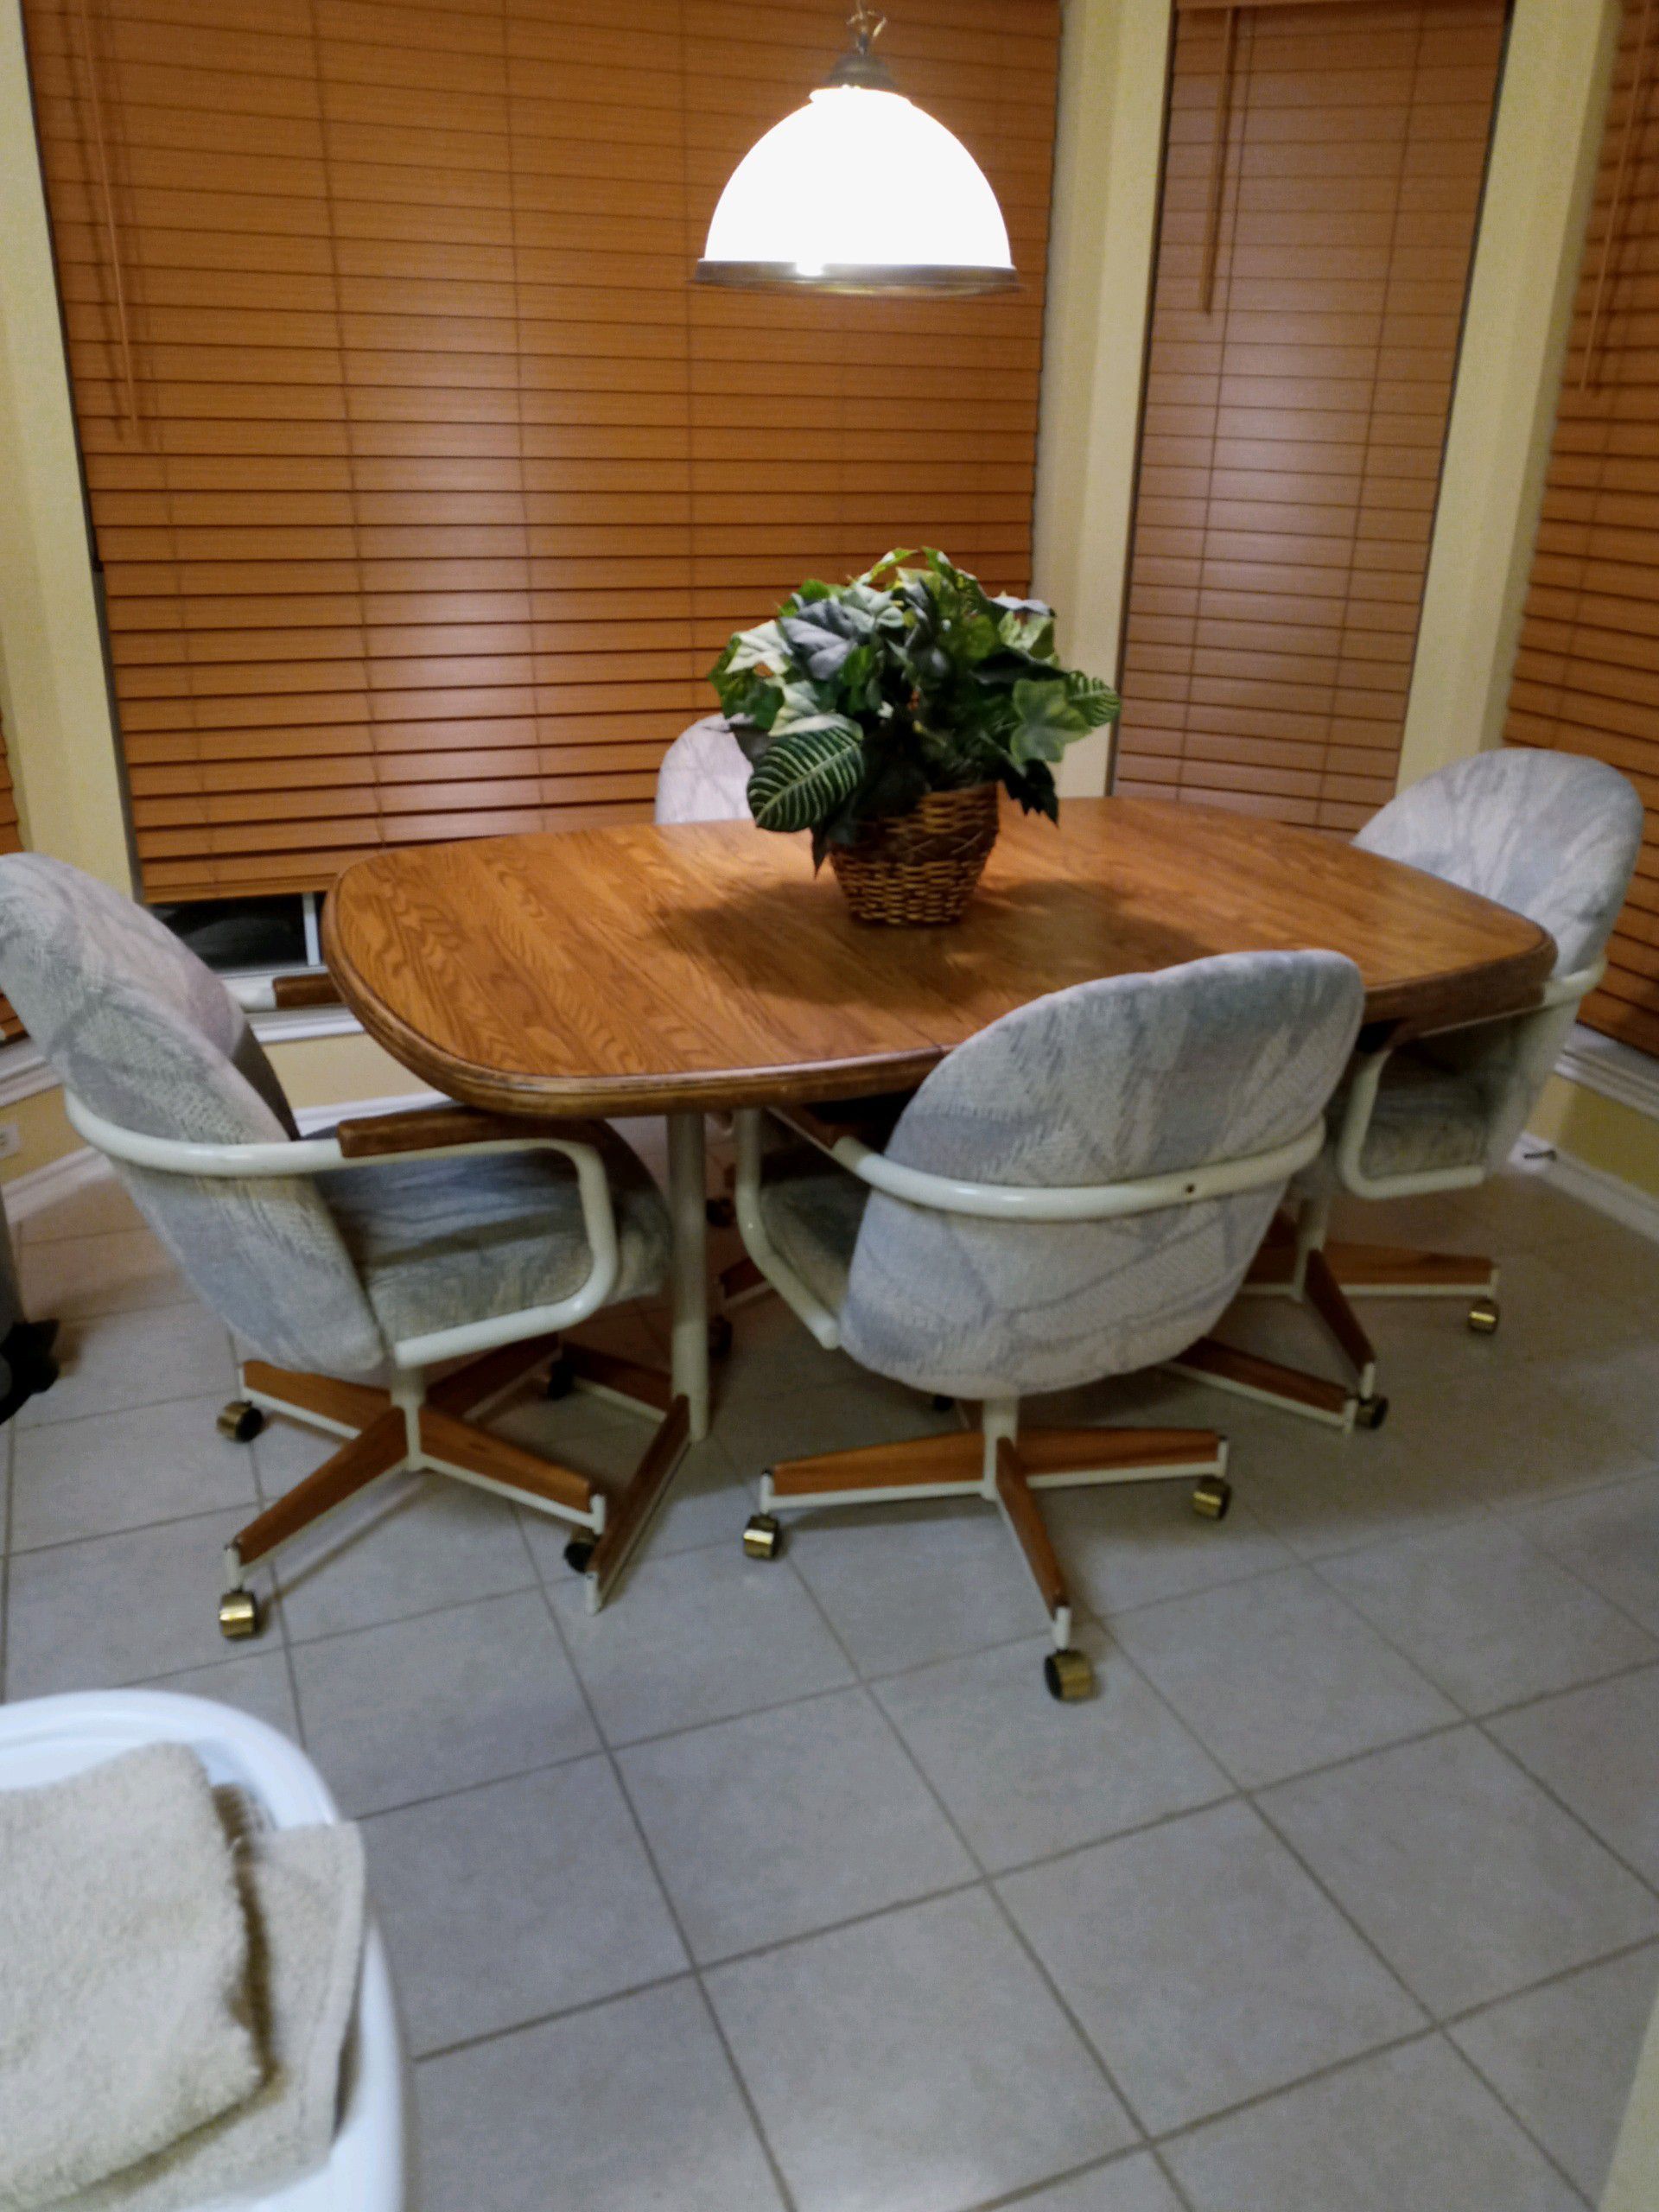 MARKED DOWN! KITCHEN Kitchen Table with Rolling Chairs